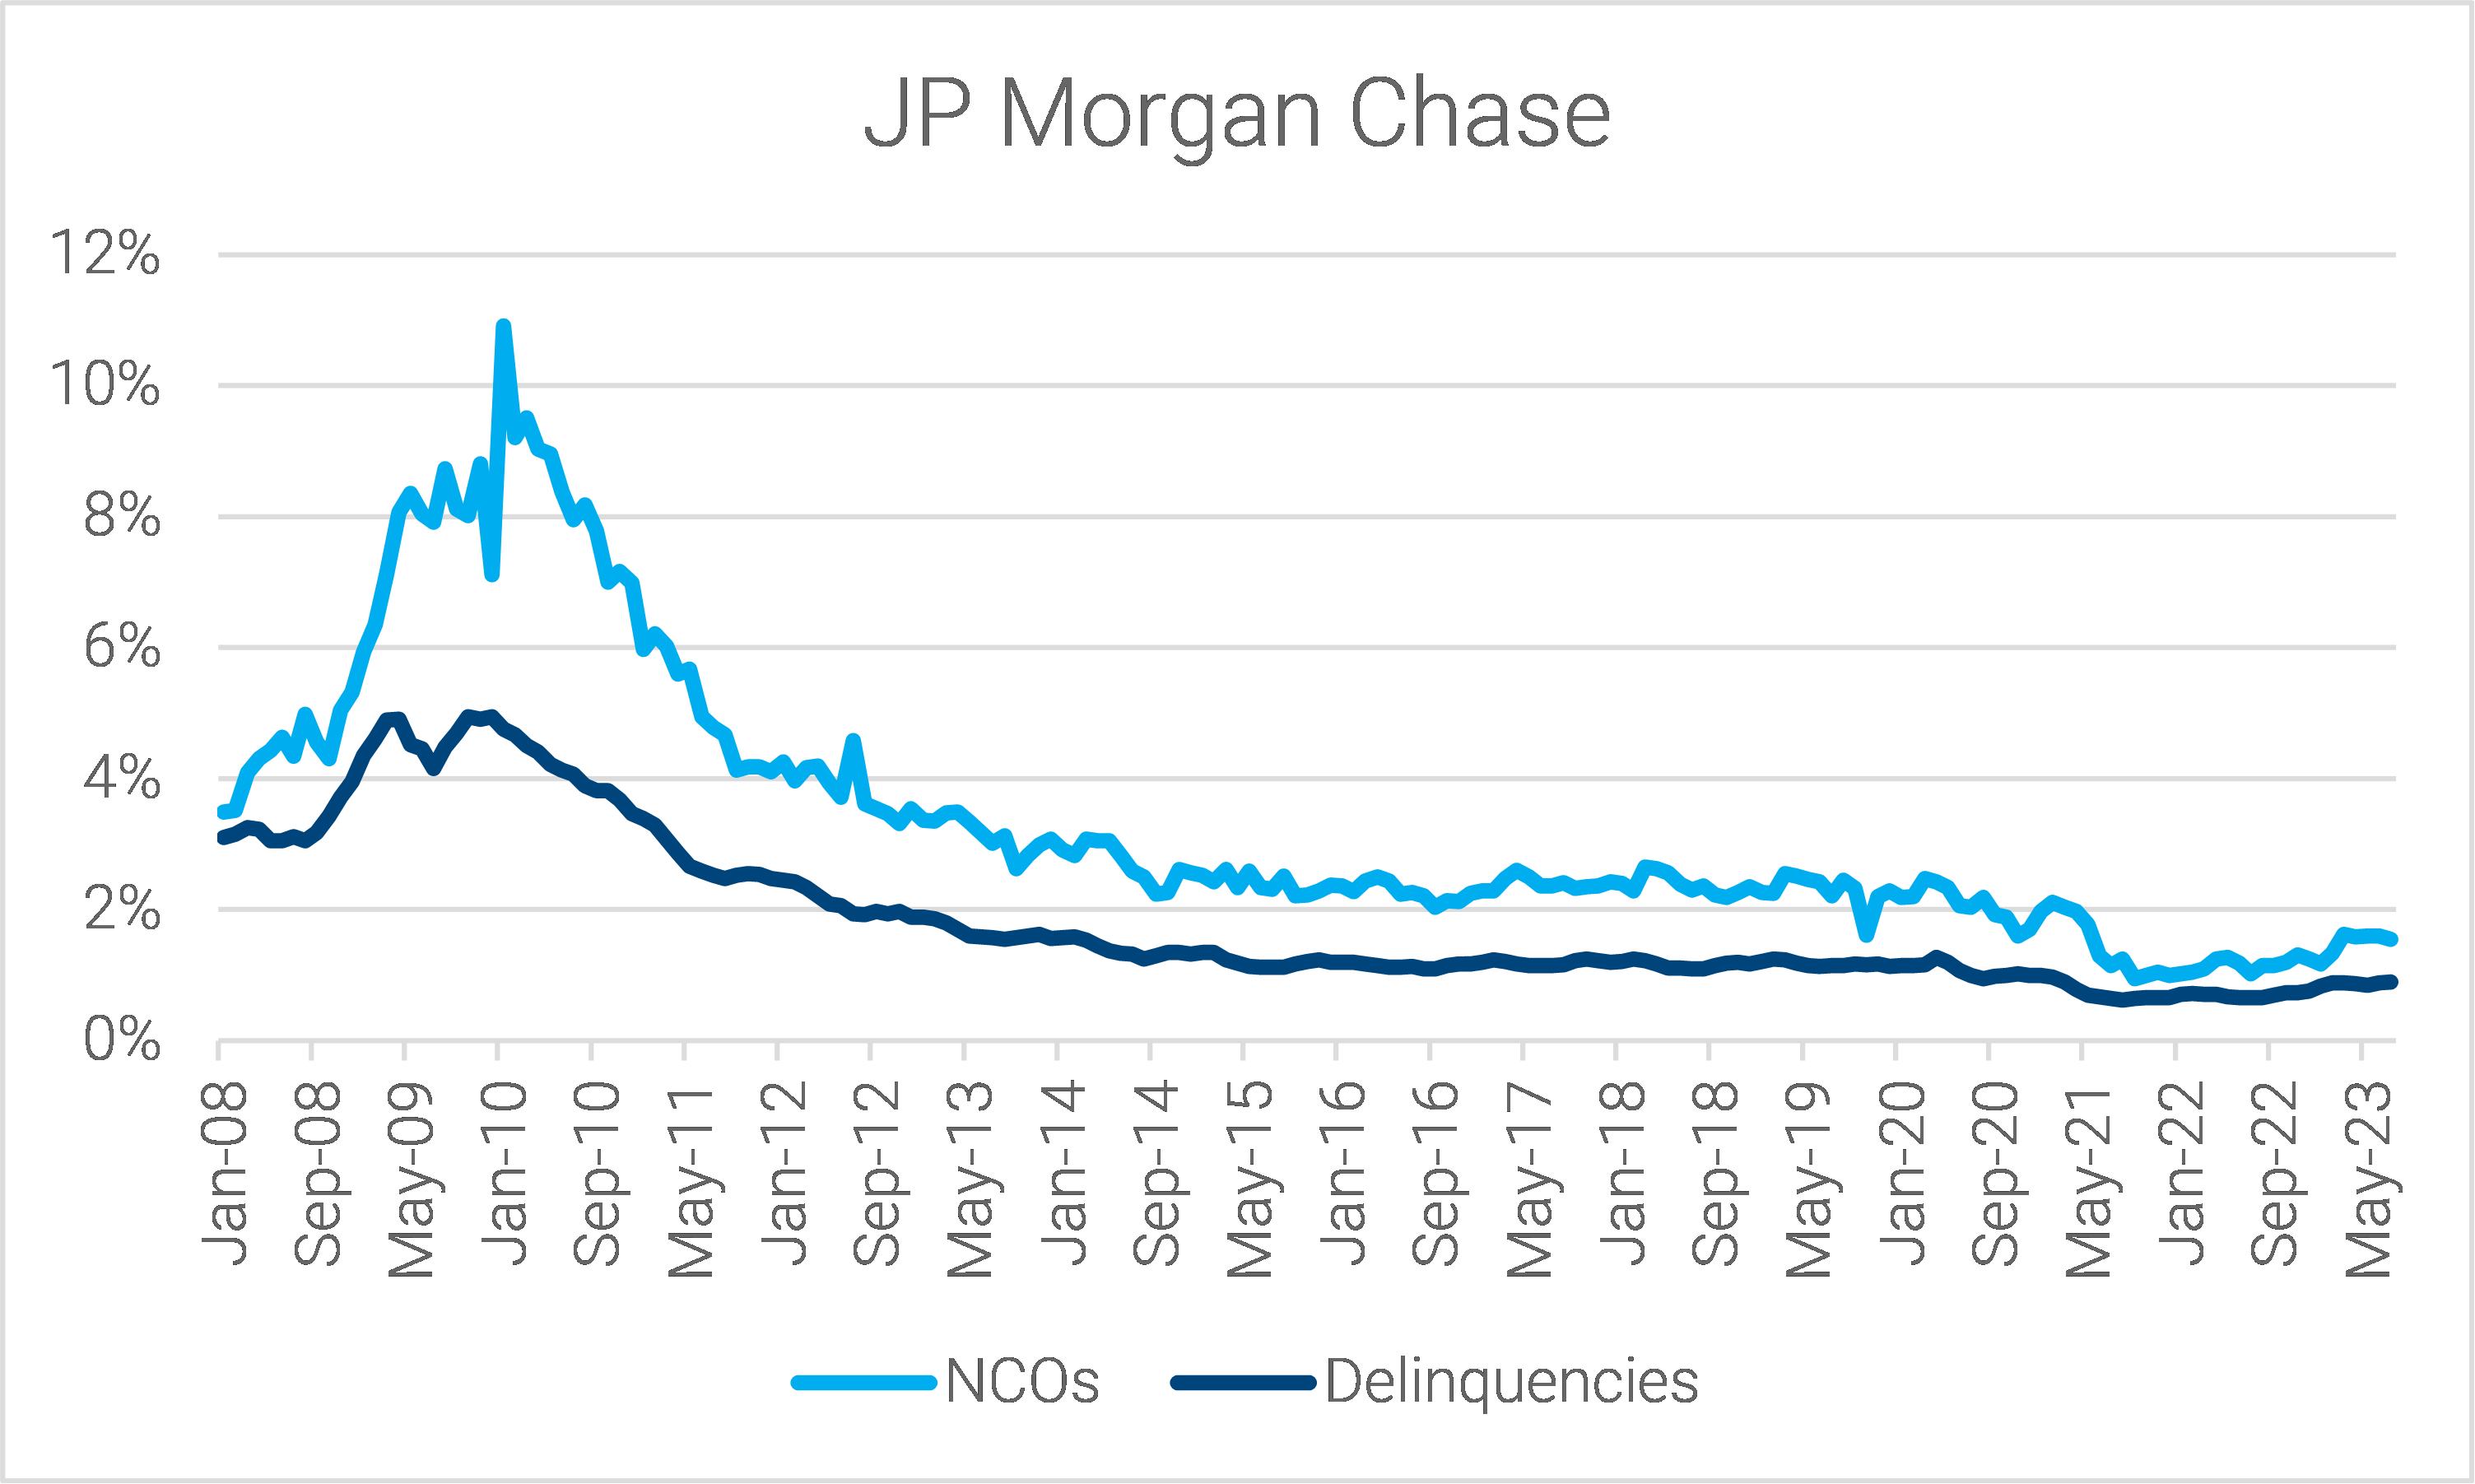 08-jp-morgan-chase-master-trust-net-charge-off-and-delinquency-rates